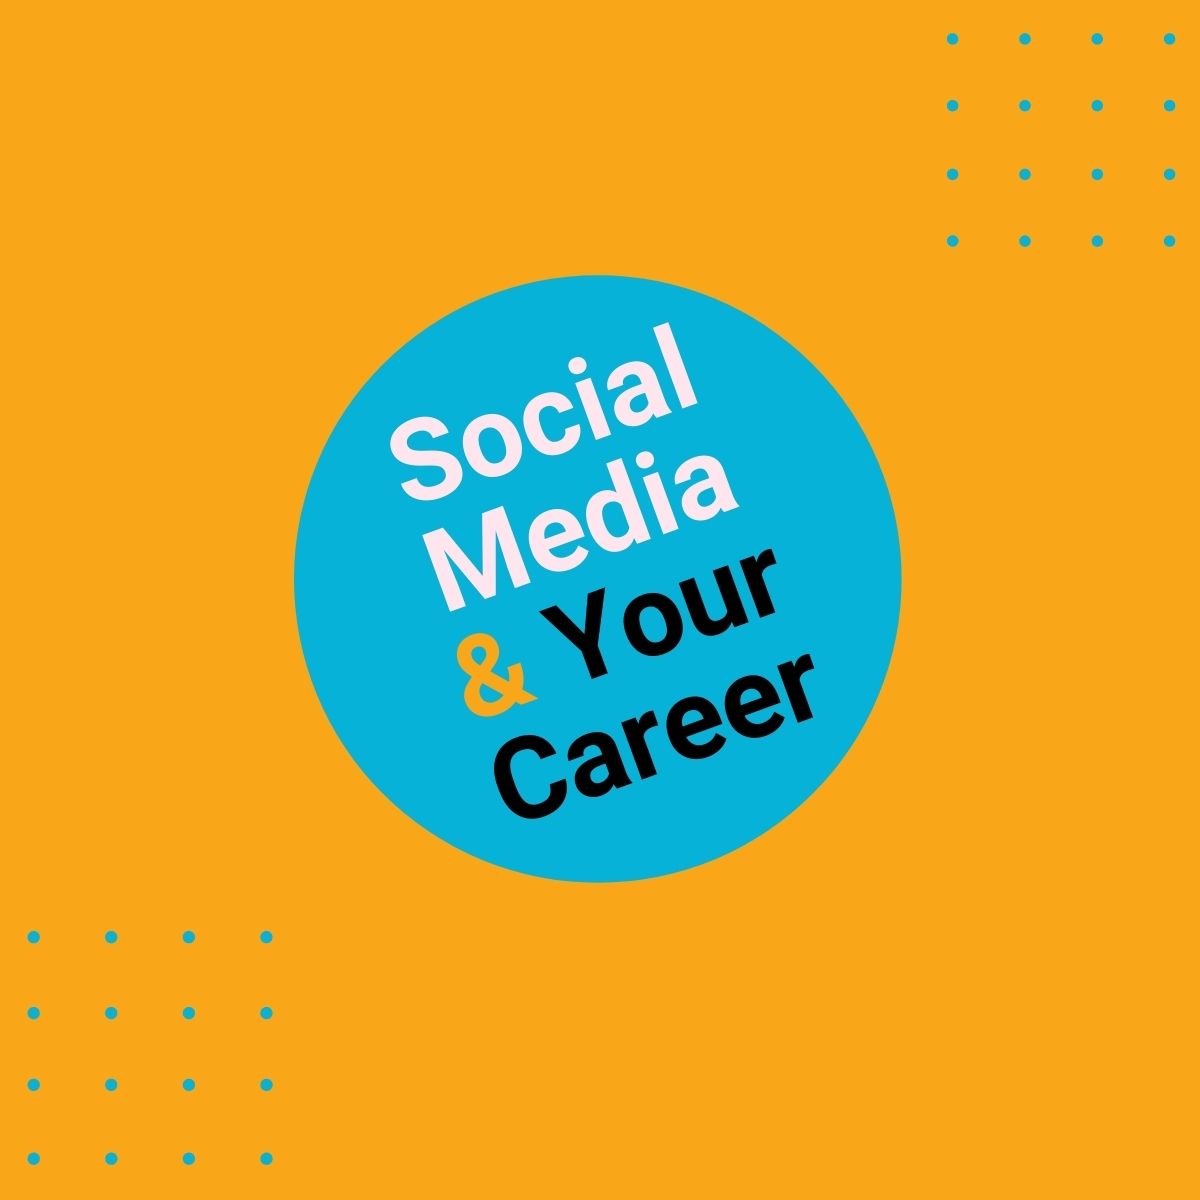 Image featuring test social media & your career